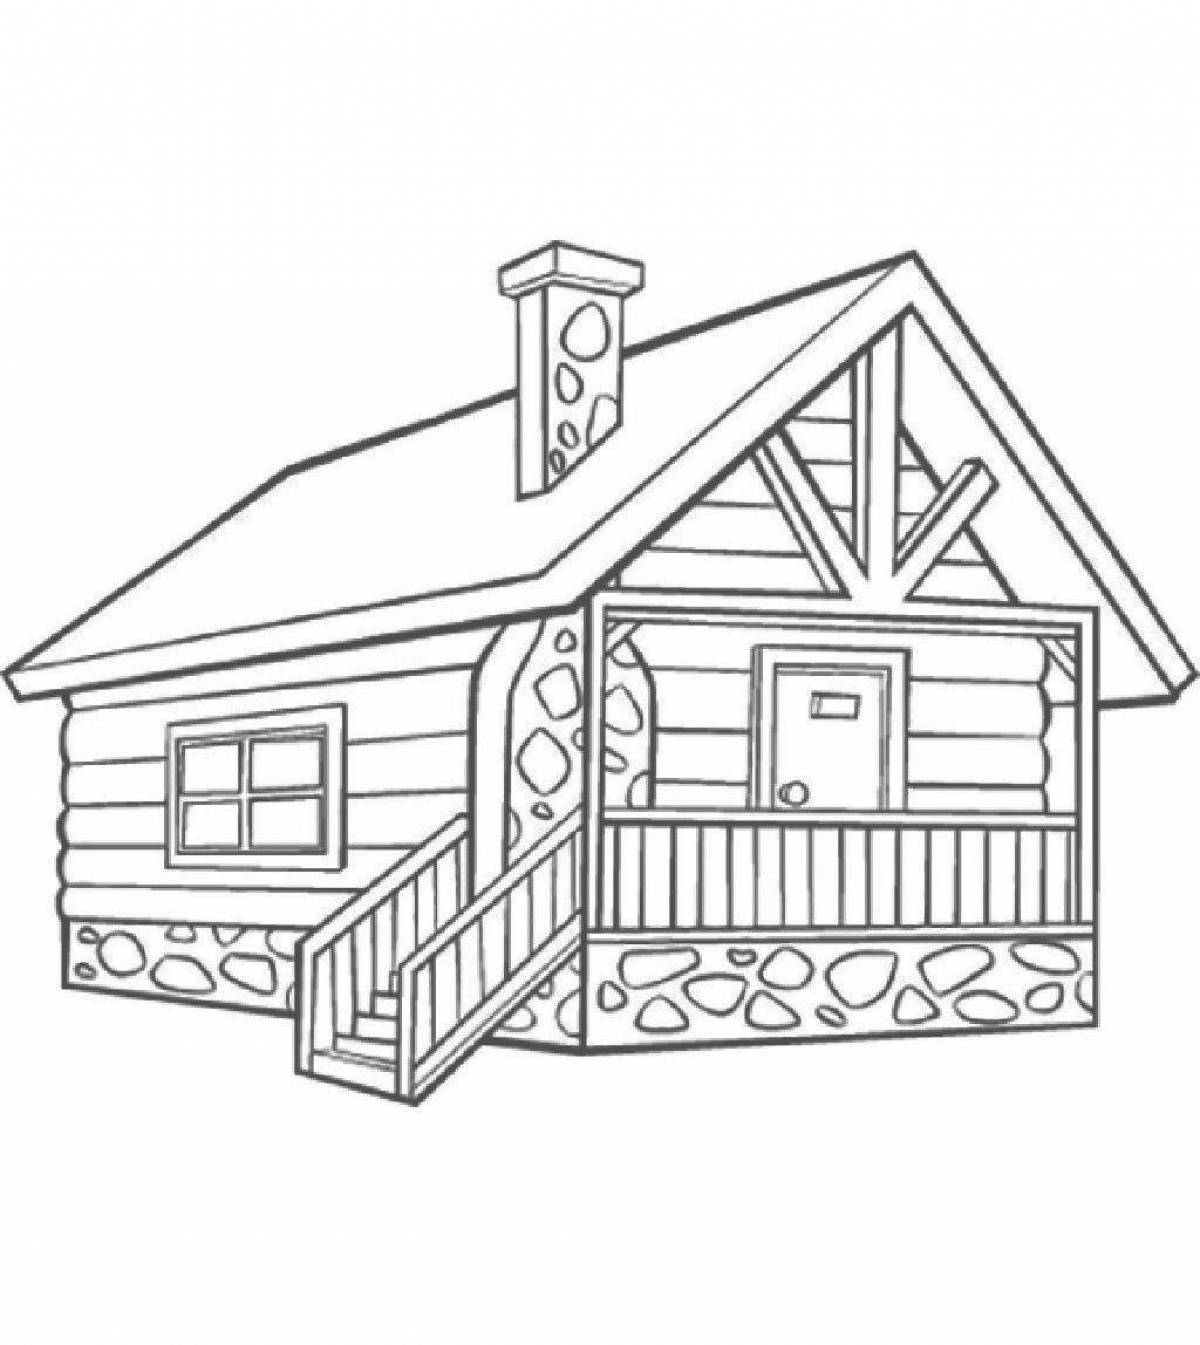 Coloring book exquisite country house